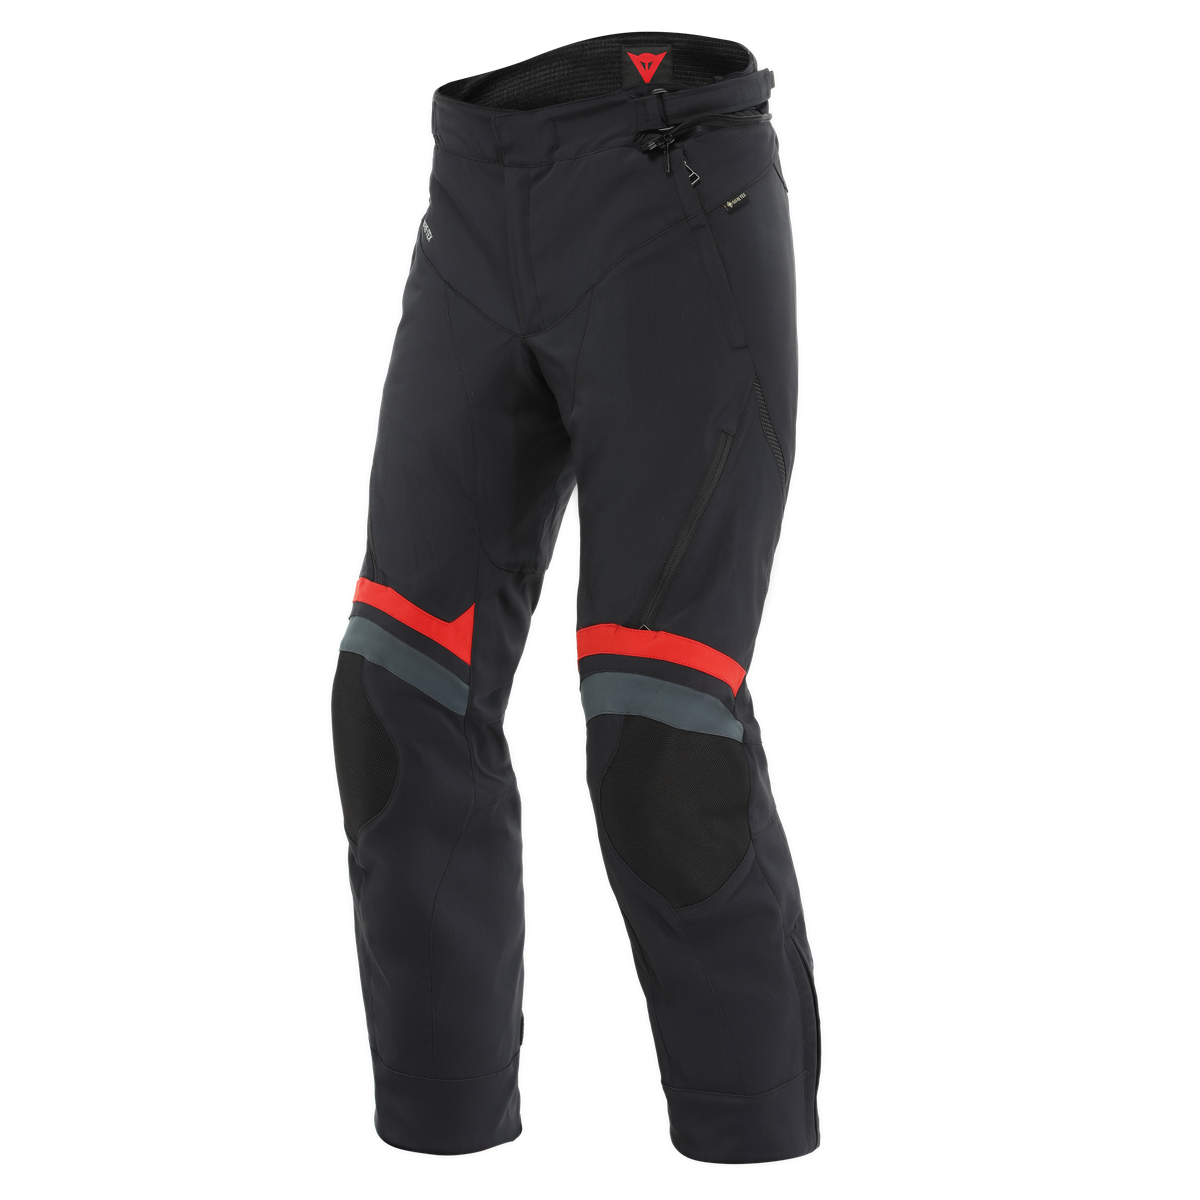 Image of Dainese Carve Master 3 Gore-Tex Pants Black Lava Red Size 52 ID 8051019377289